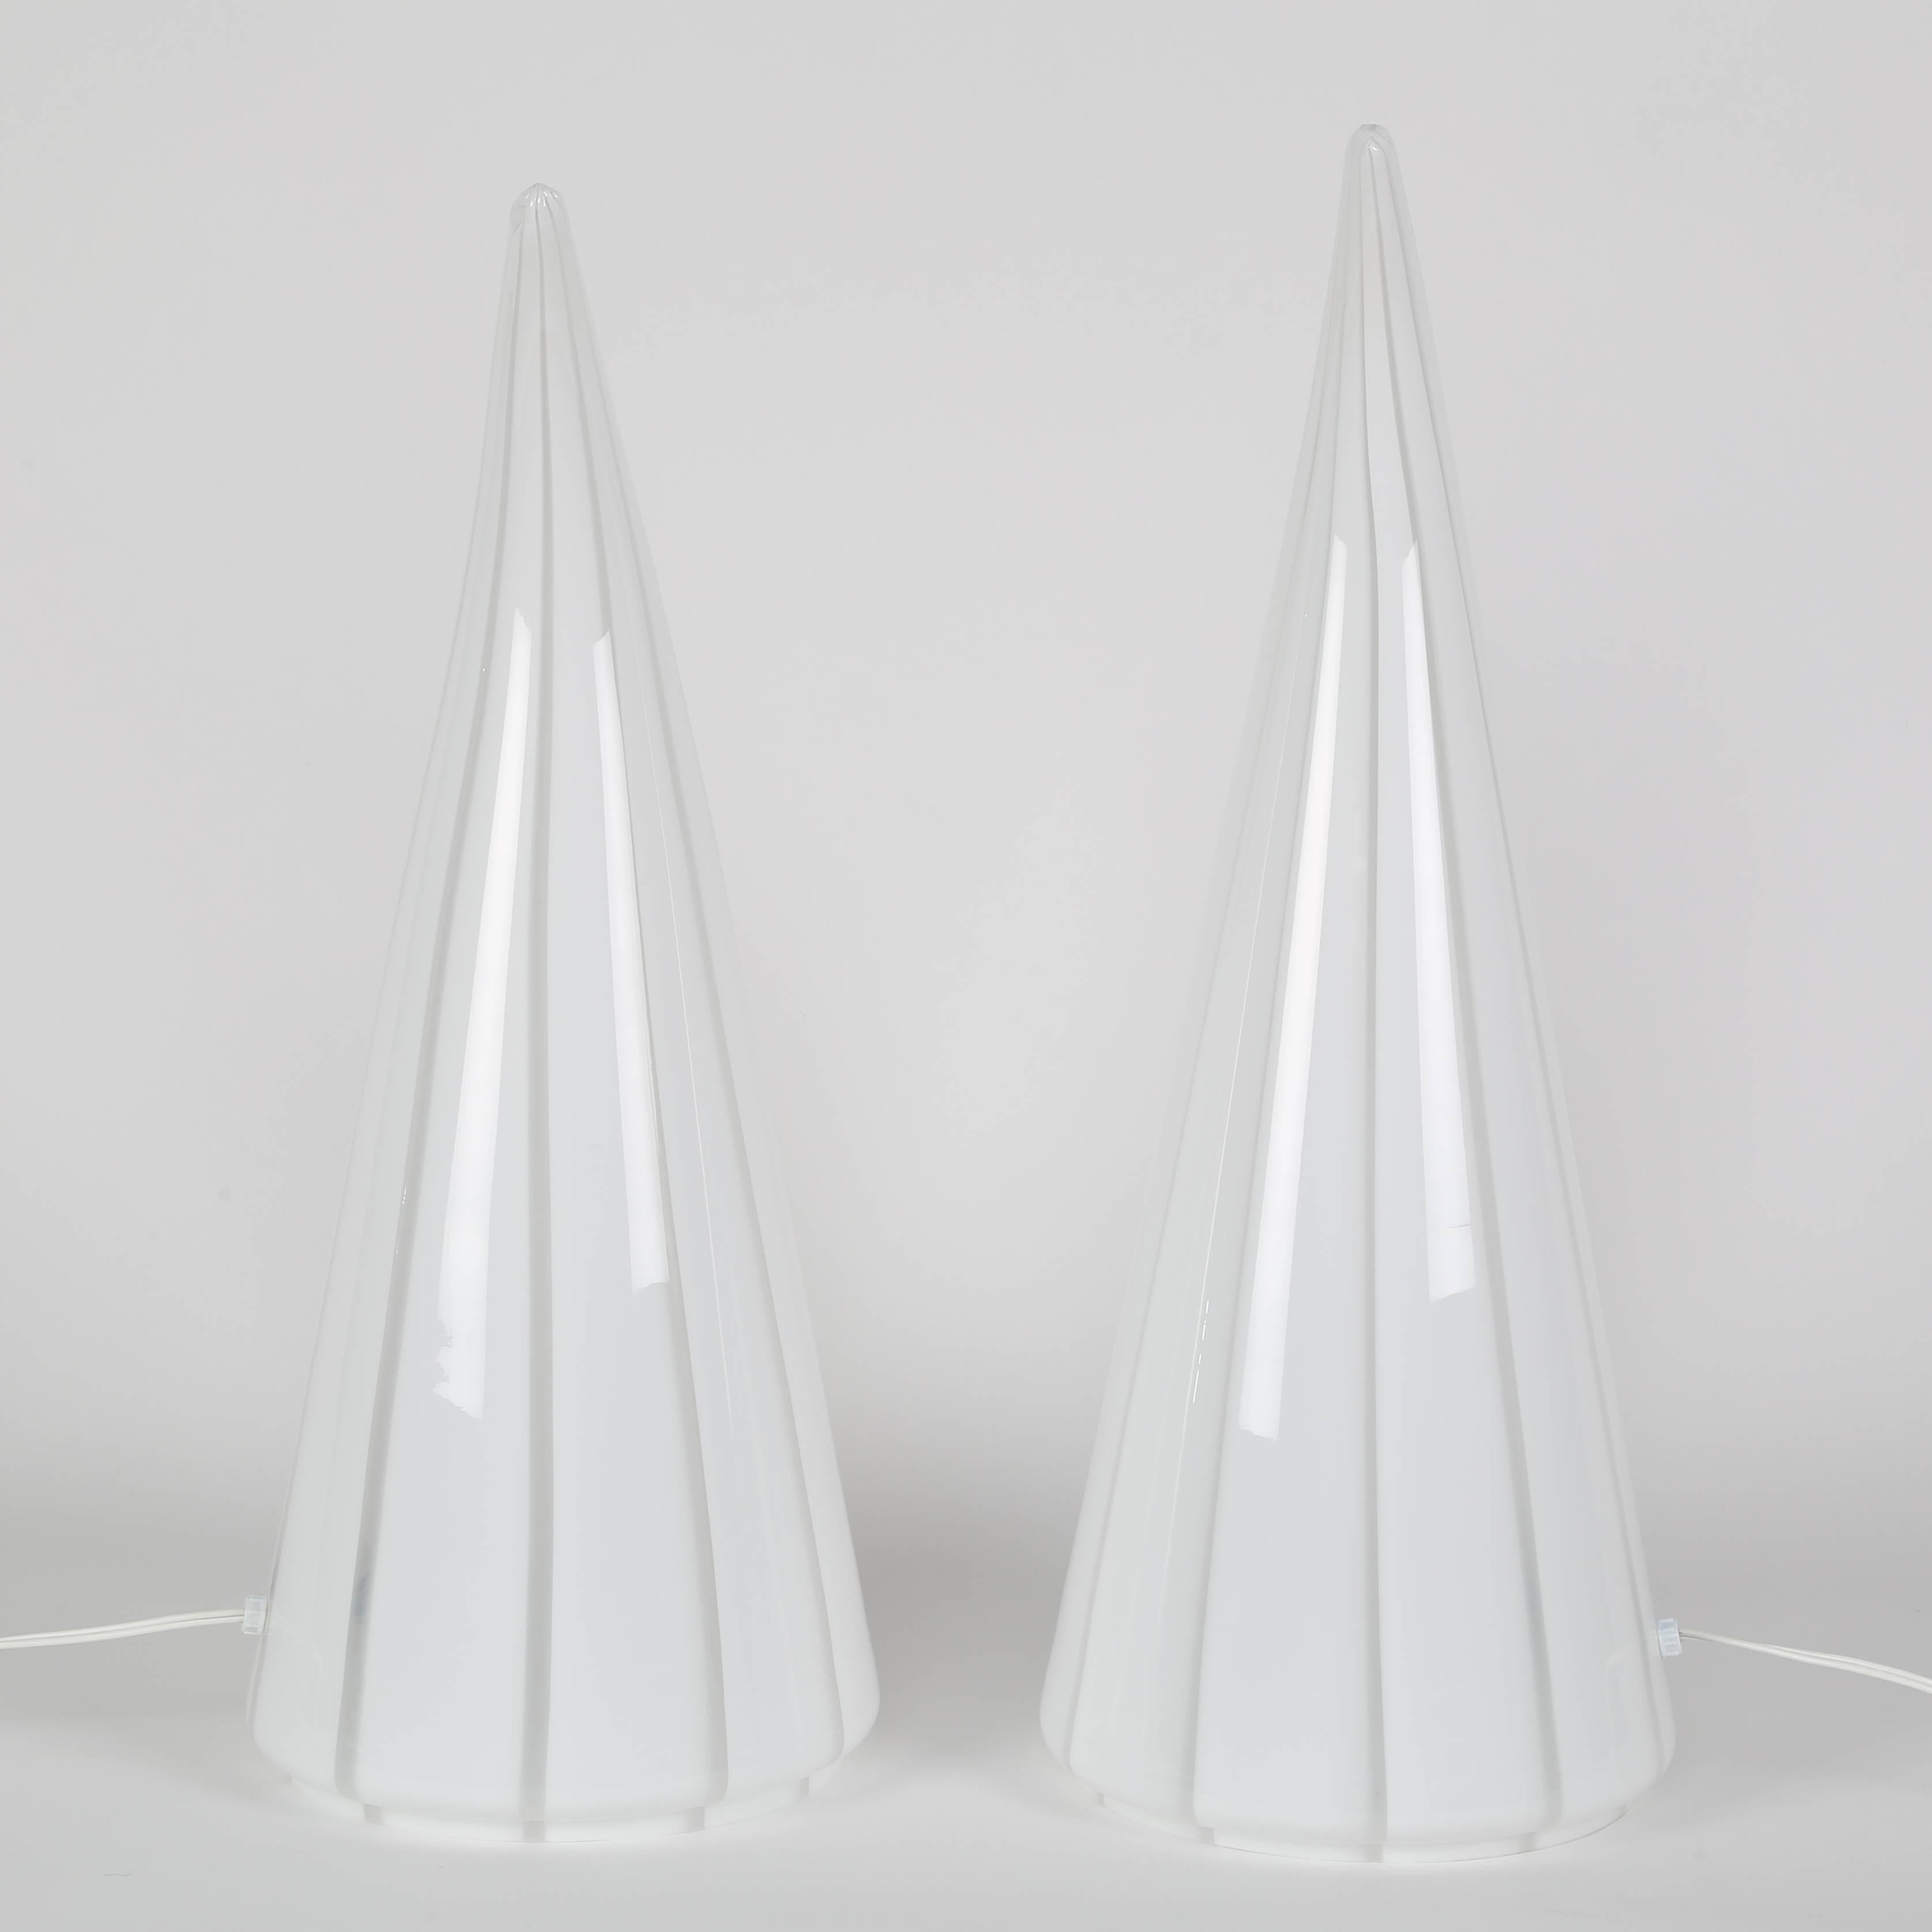 Elegant pair of 1980s Italian handblown-glass table lamps in a bent conical form with alternating stripes of clear and white glass. Lamps bend in opposite directions, enabling the pair to be positioned symmetrically. Each holds a single